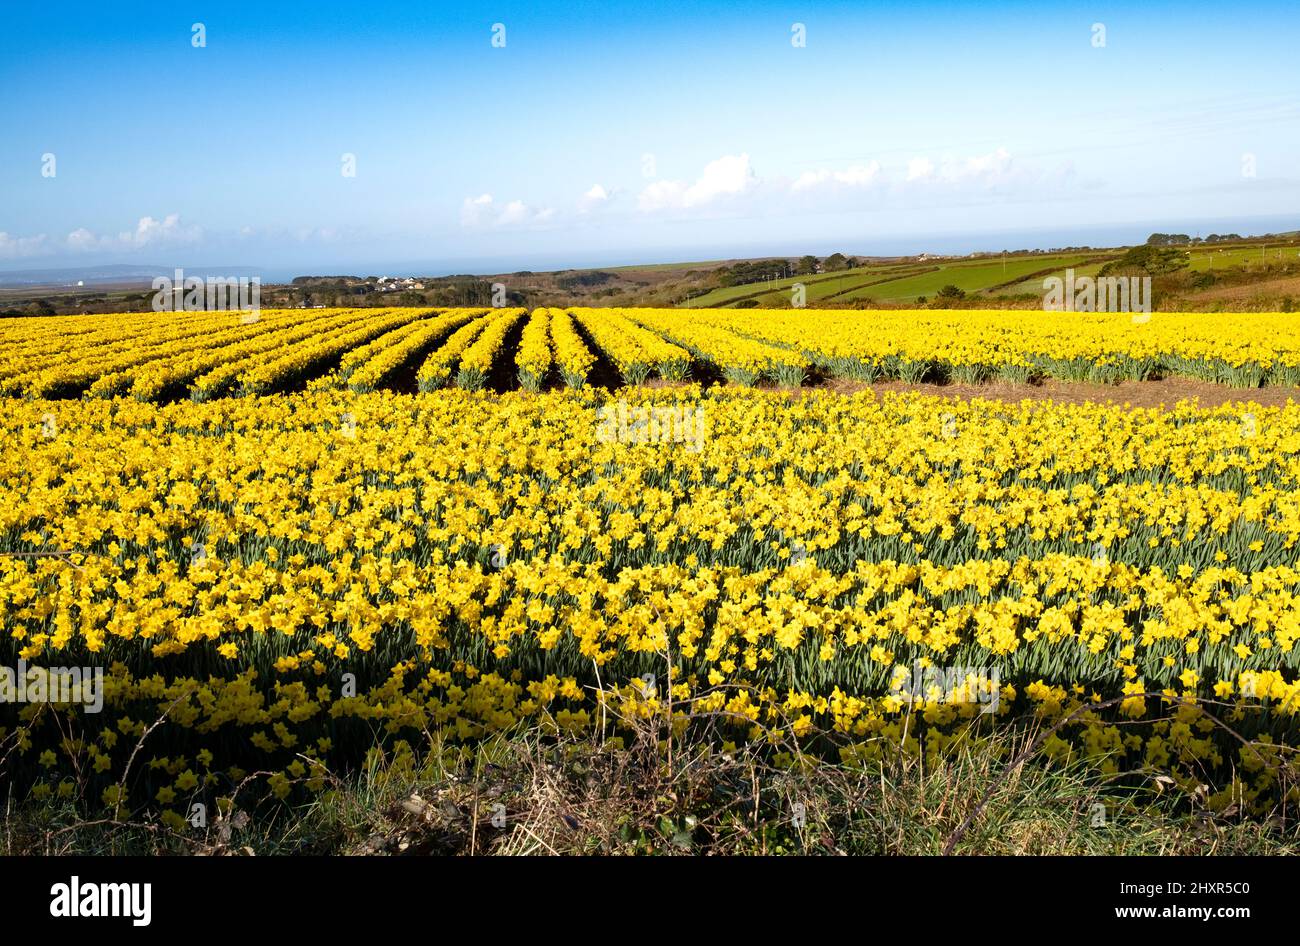 Daffodil fields near st agnes in cornwall england Stock Photo